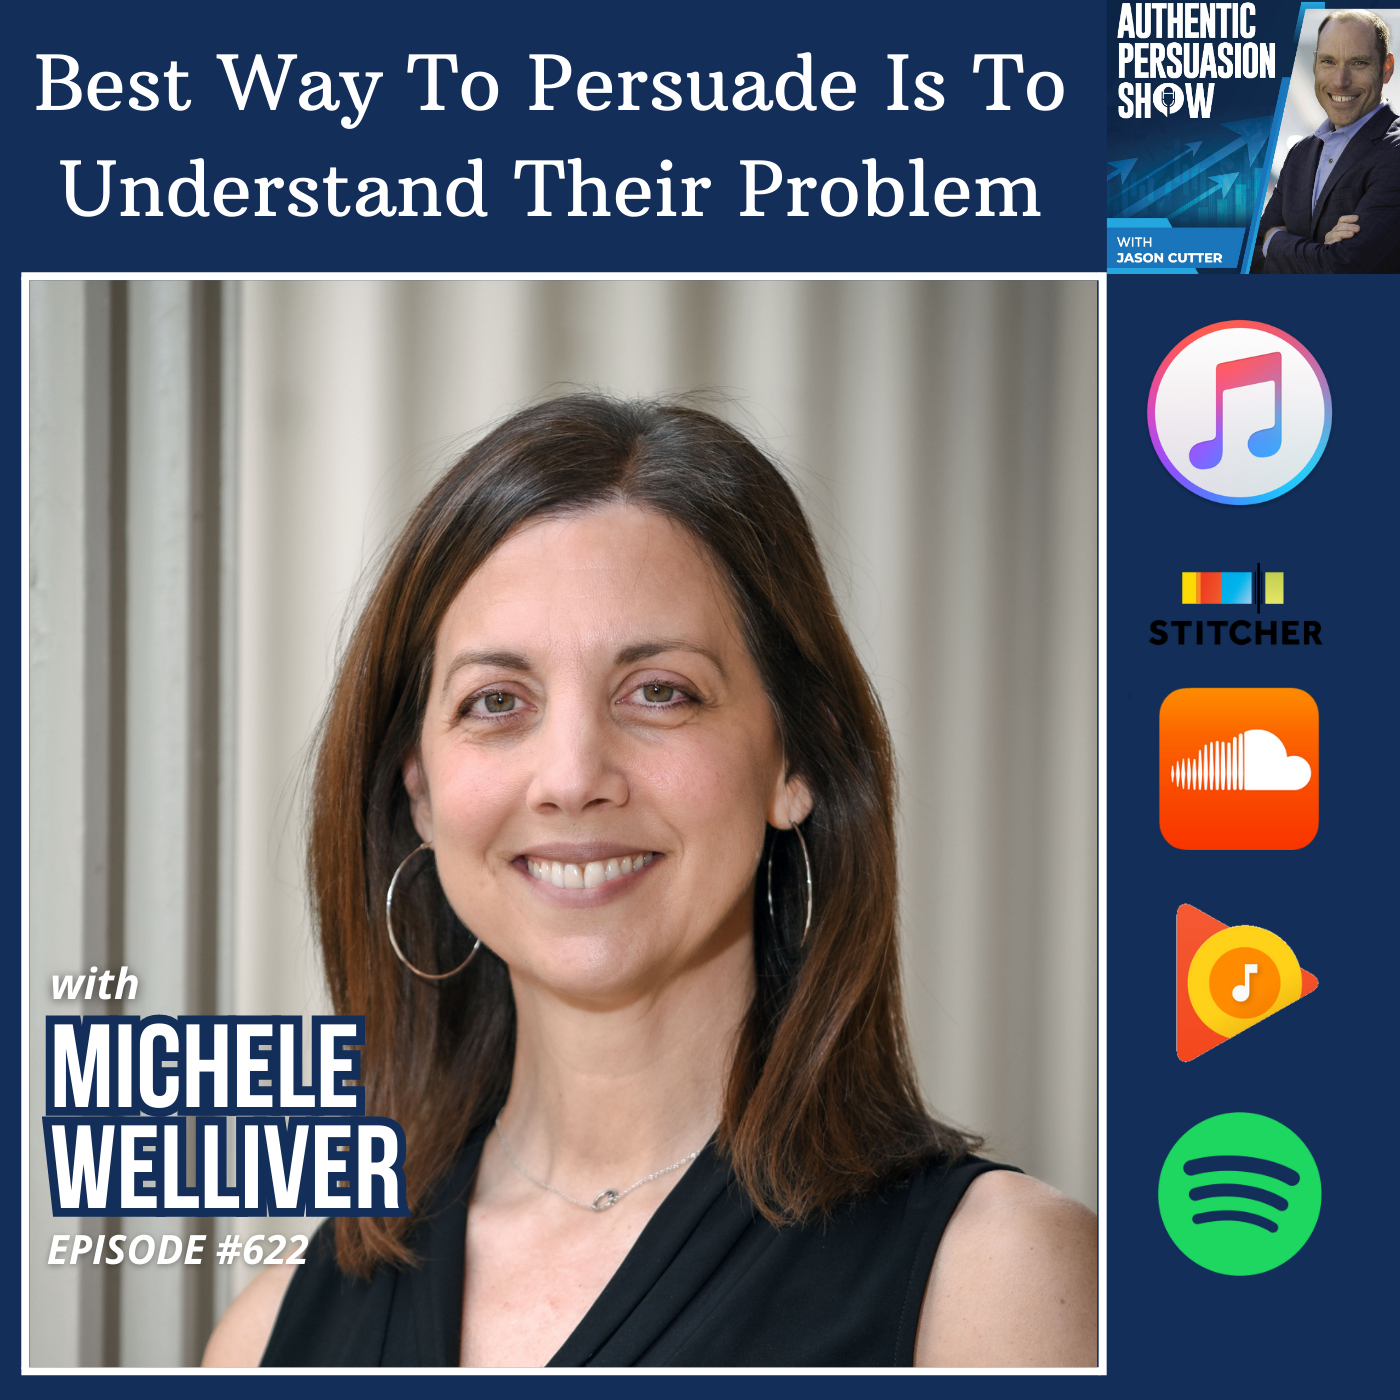 [622] Best Way To Persuade Is To Understand Their Problem, with Dr Michele Welliver from Susquehanna University